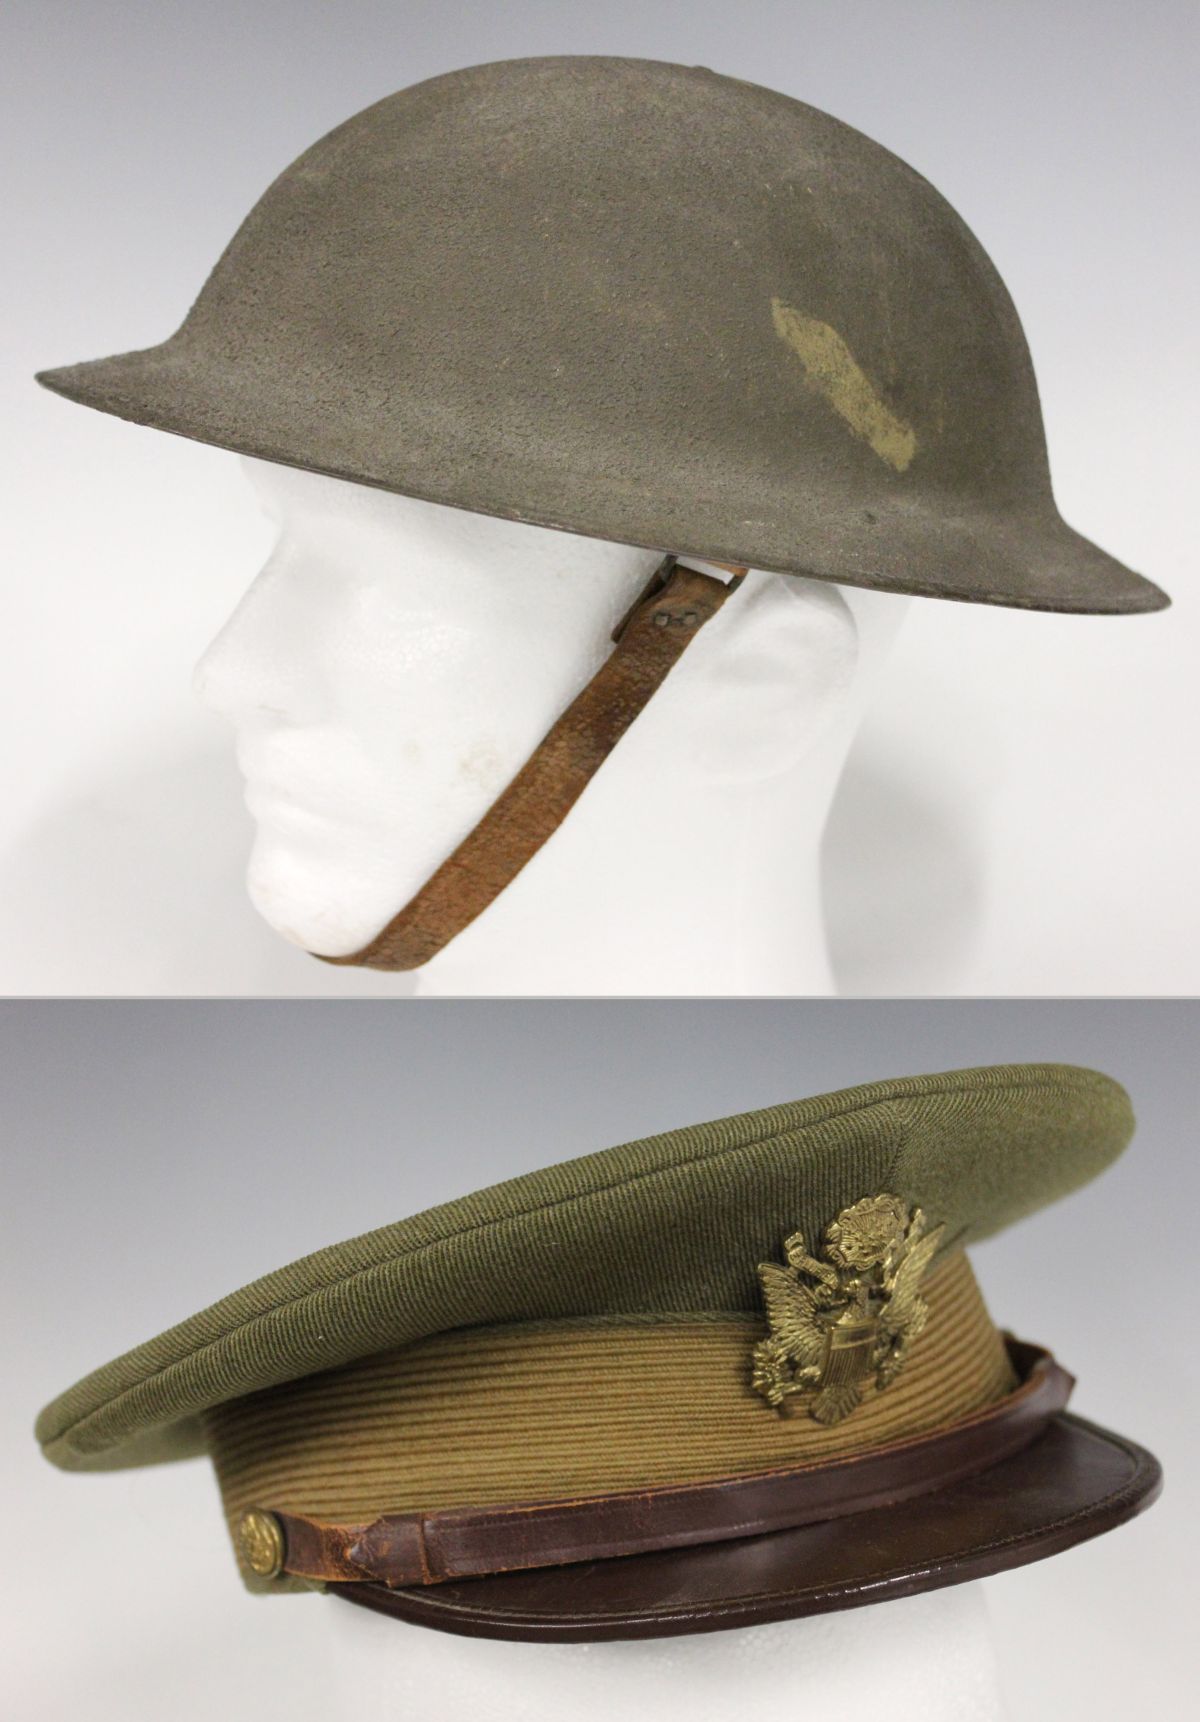 US ARMY WWI HELMET AND OFFICER